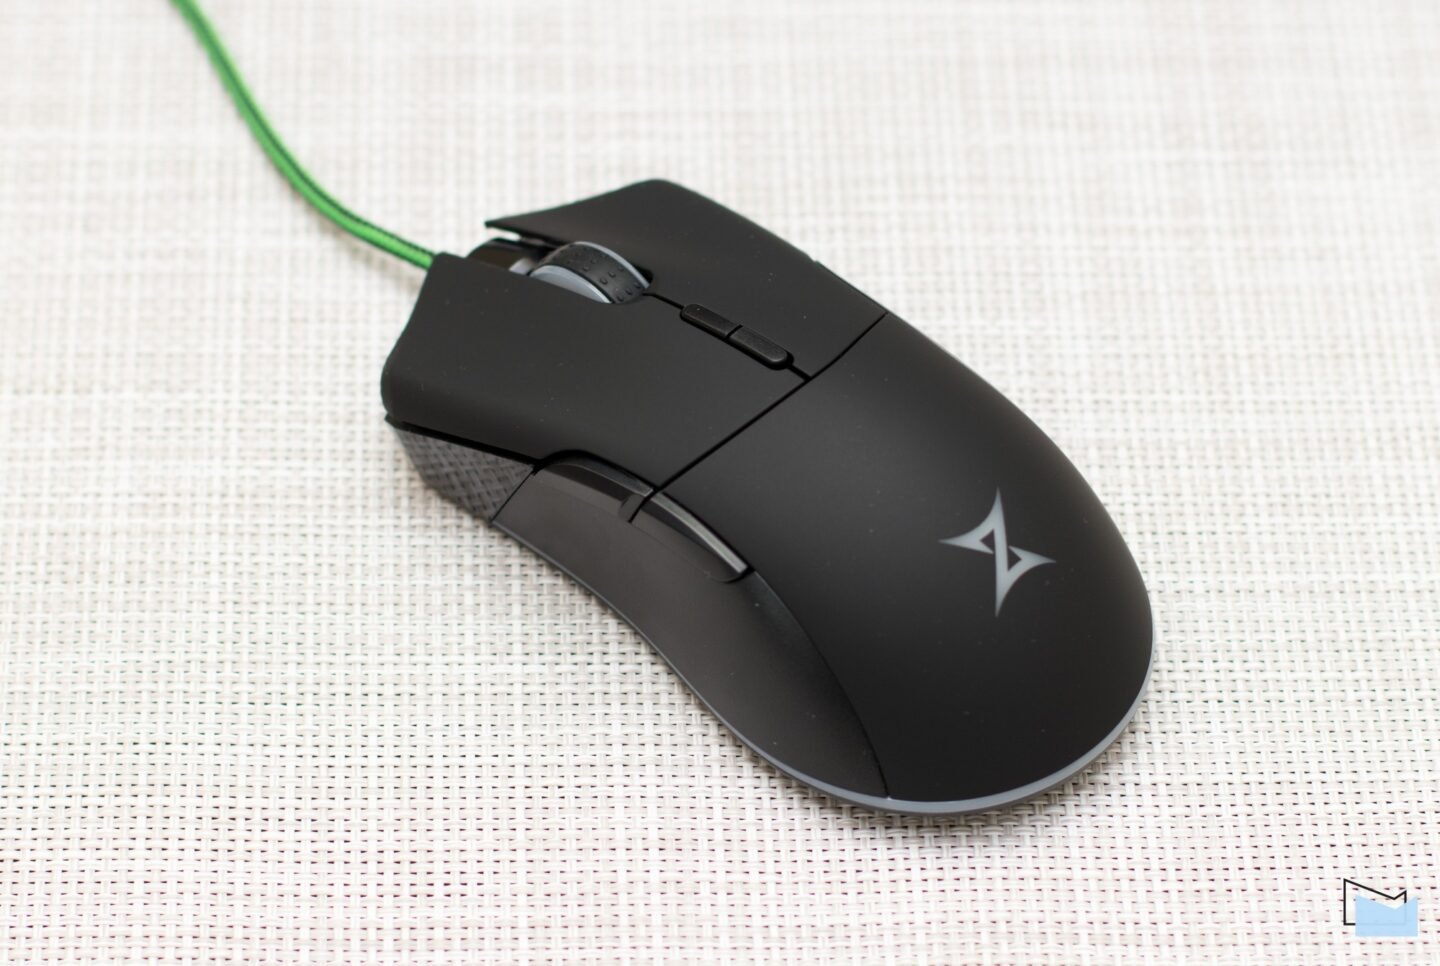 RZTK Z 500 gaming mouse review